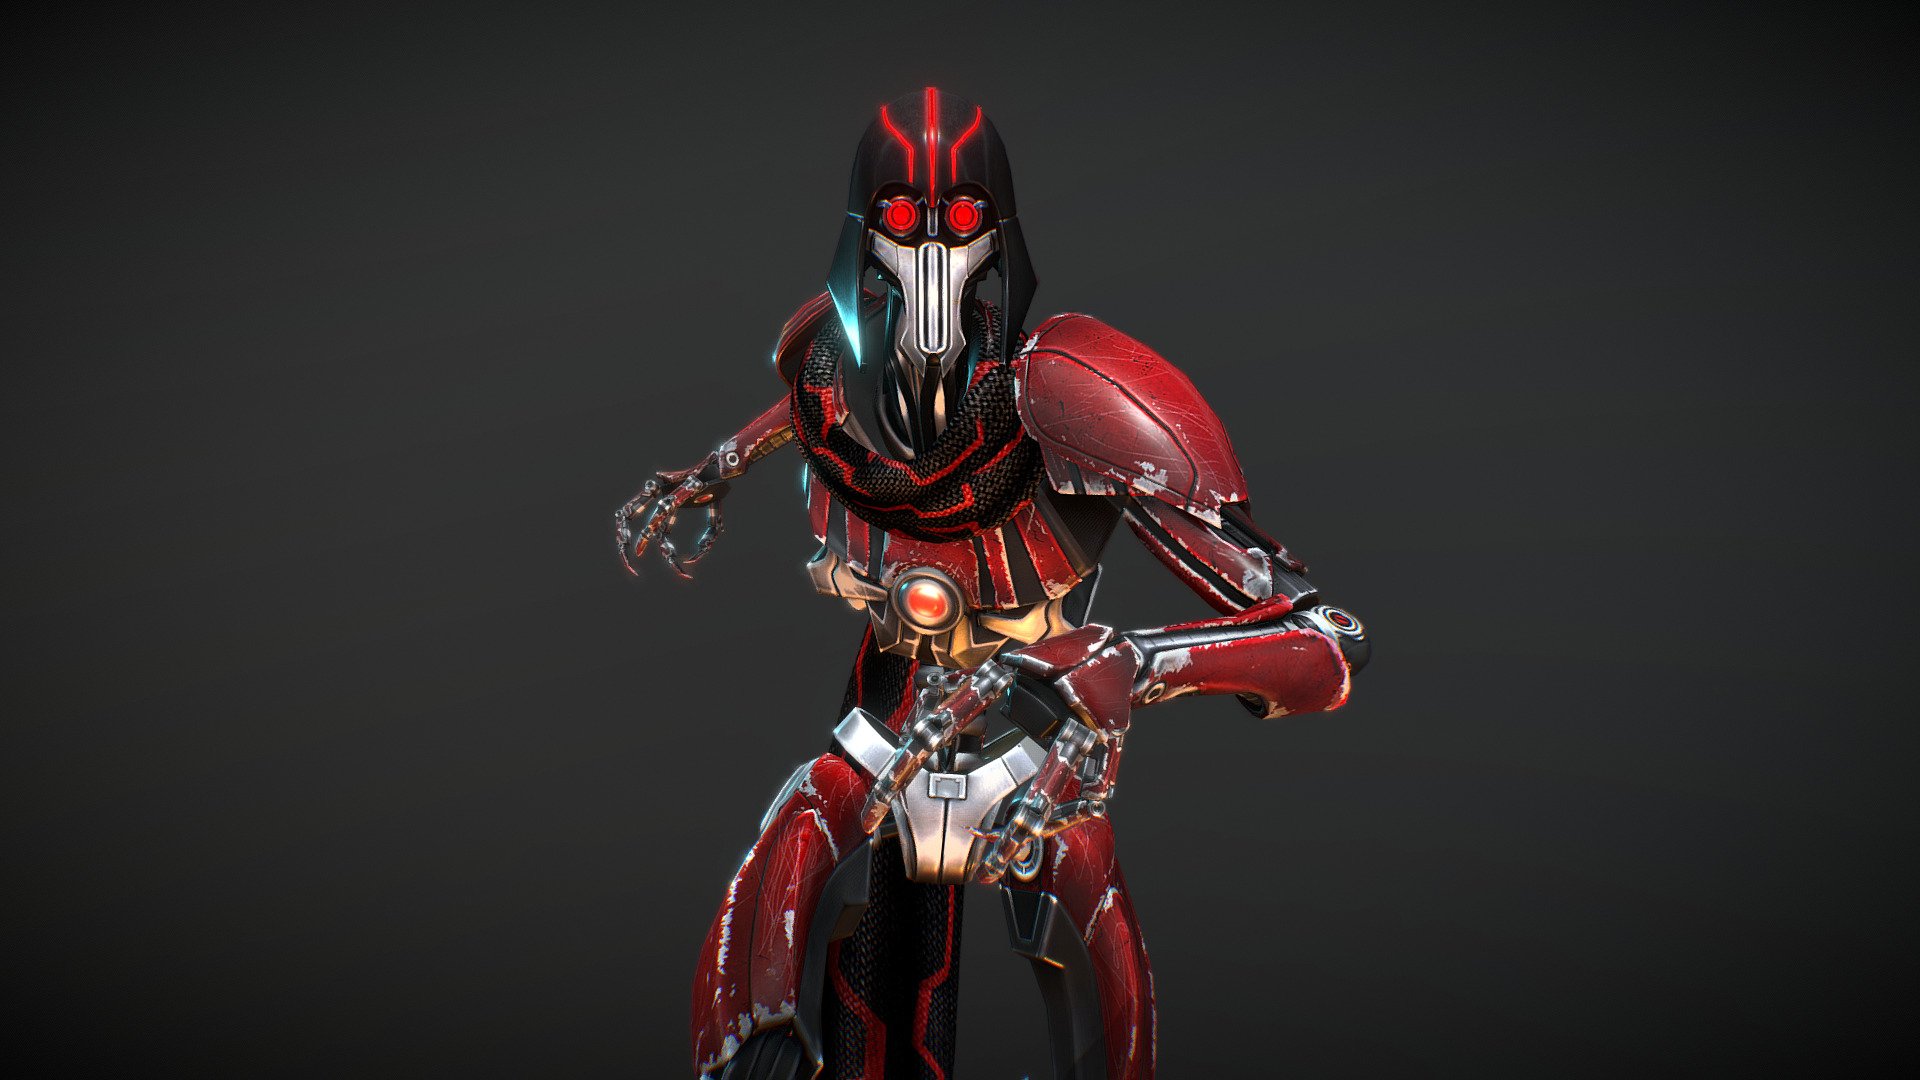 EG-5 droid. The droid appeared to be roughly humanoid in shape, with skeletal features similar to that of Grievous. Its helmeted head contained two red photoreceptors and its body was coated in red color. Its qualities included incredible speed, dexterity, and the ability to wield two lightsabers with perfect form 3d model